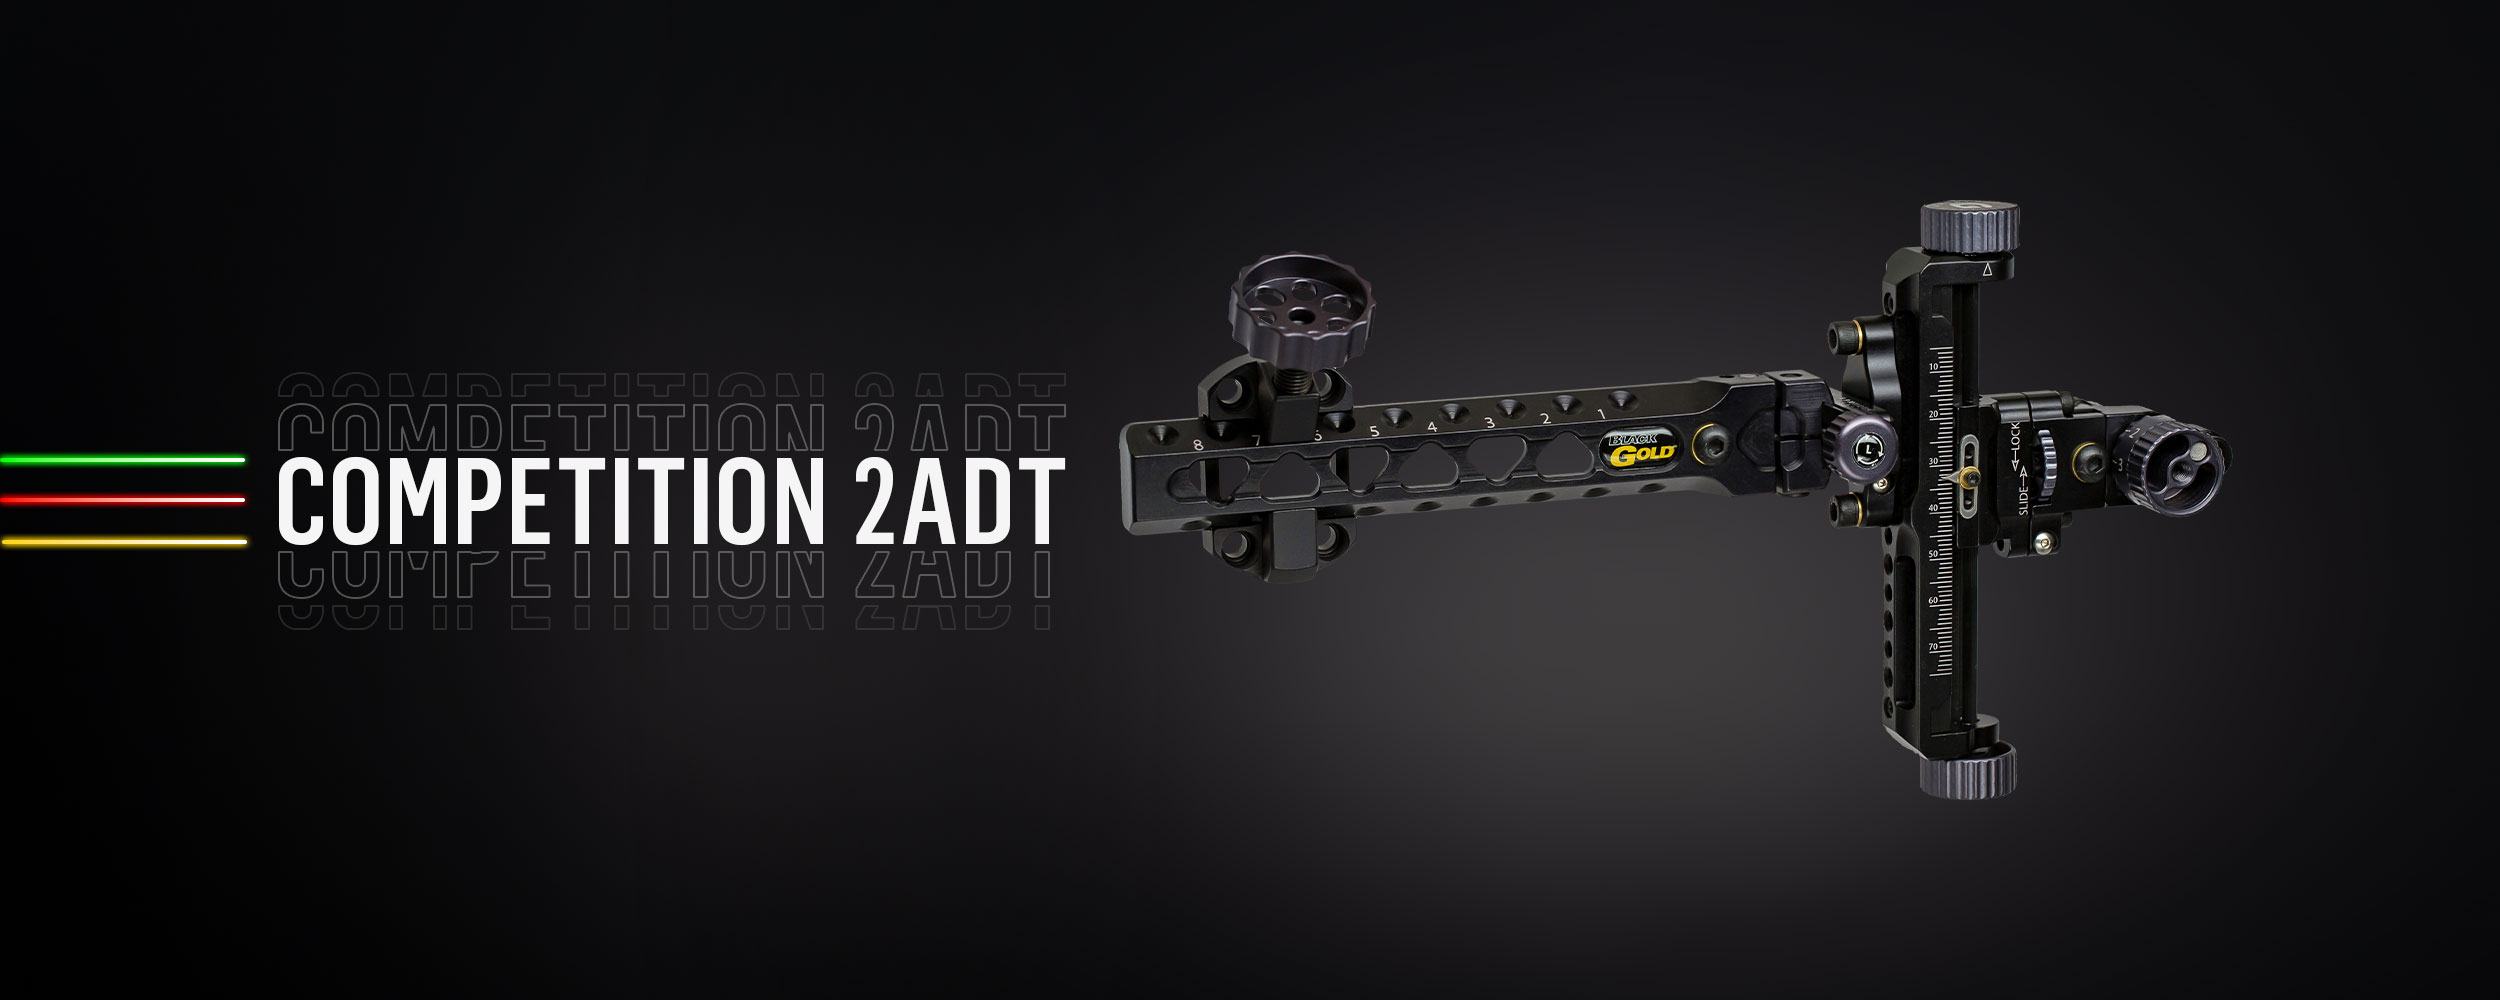 competition2ADT sight header image